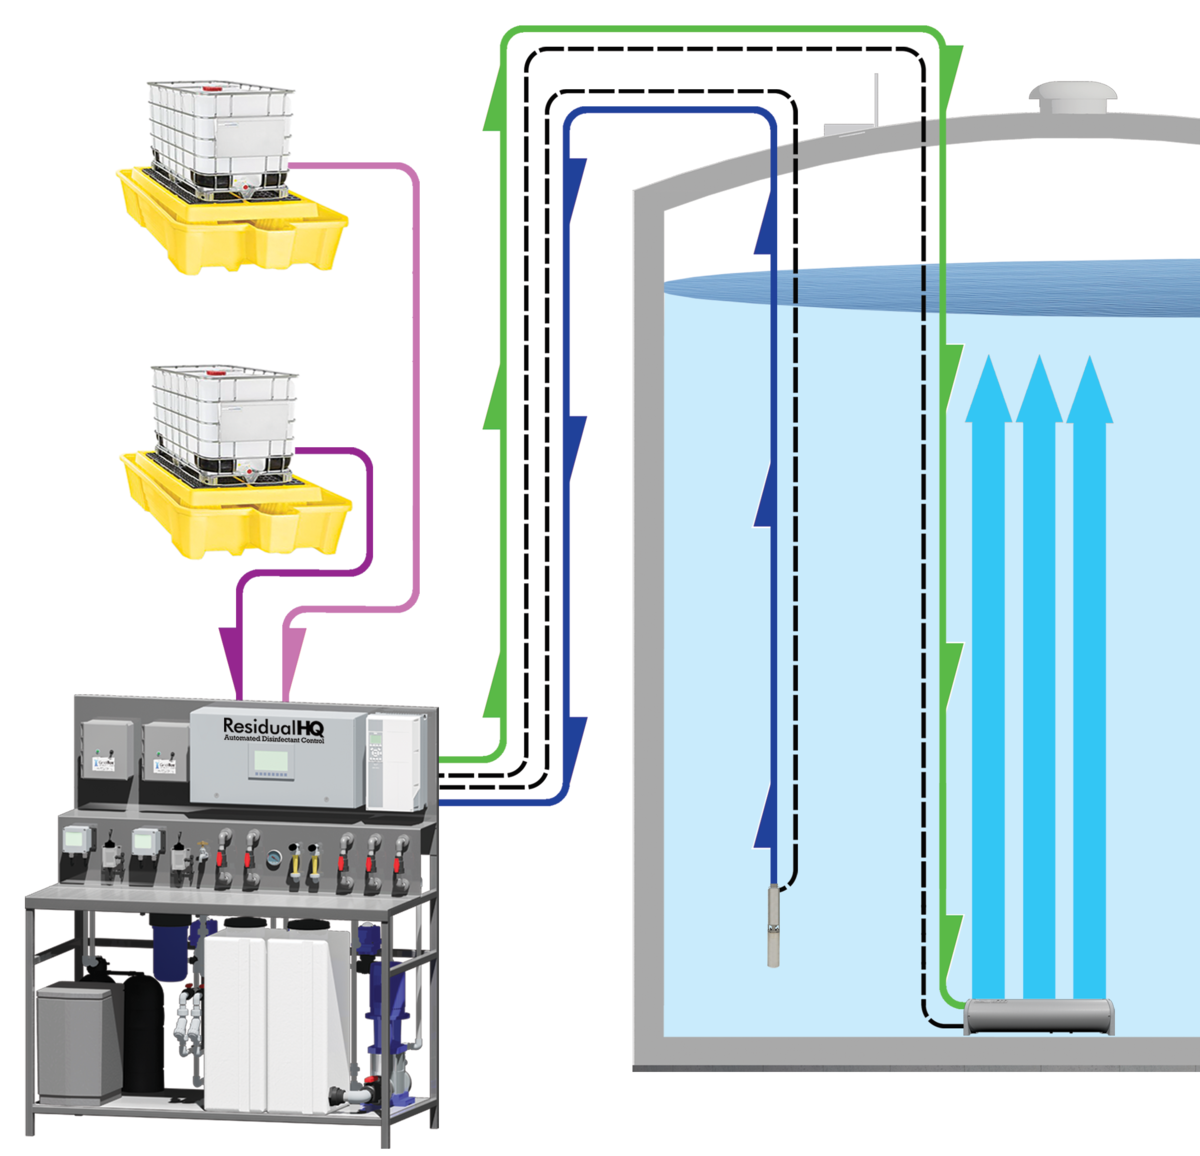 image showing the general system overview of the ResidualHQ Disinfectant Control System for potable water storage tanks